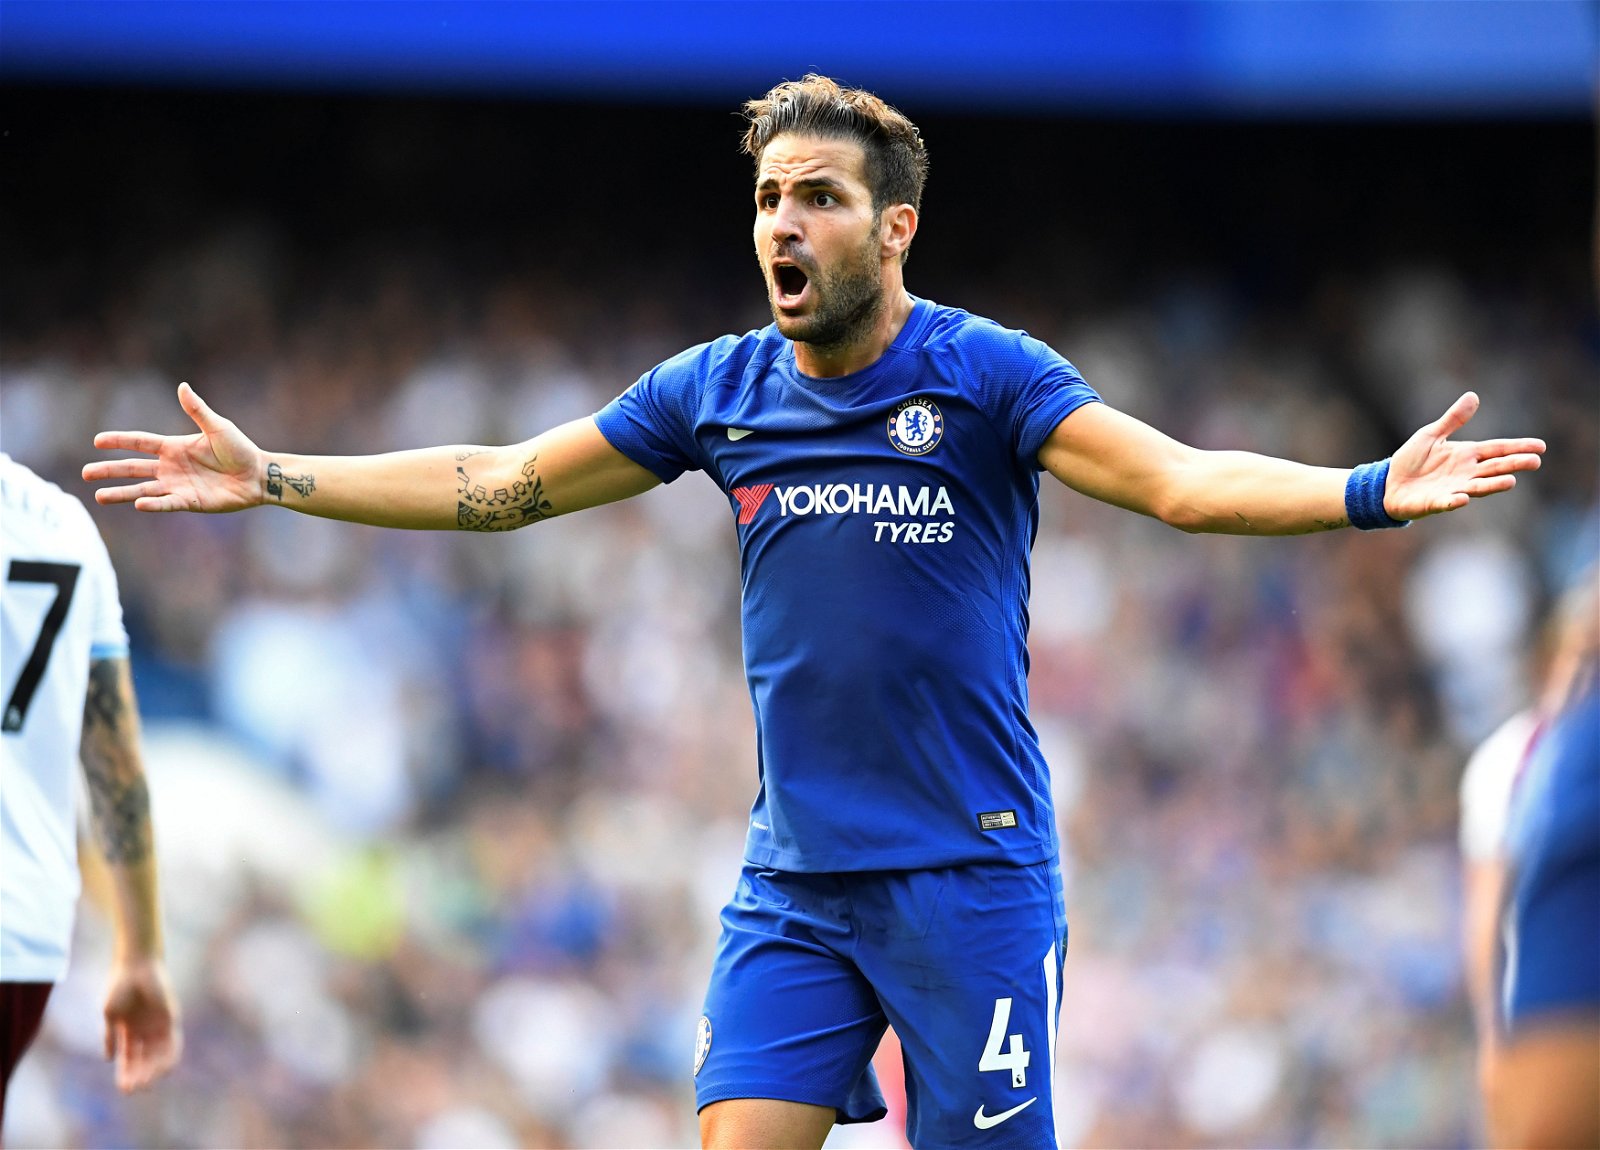 Cesc Fabregas is one of the players who played for Chelsea and Arsenal